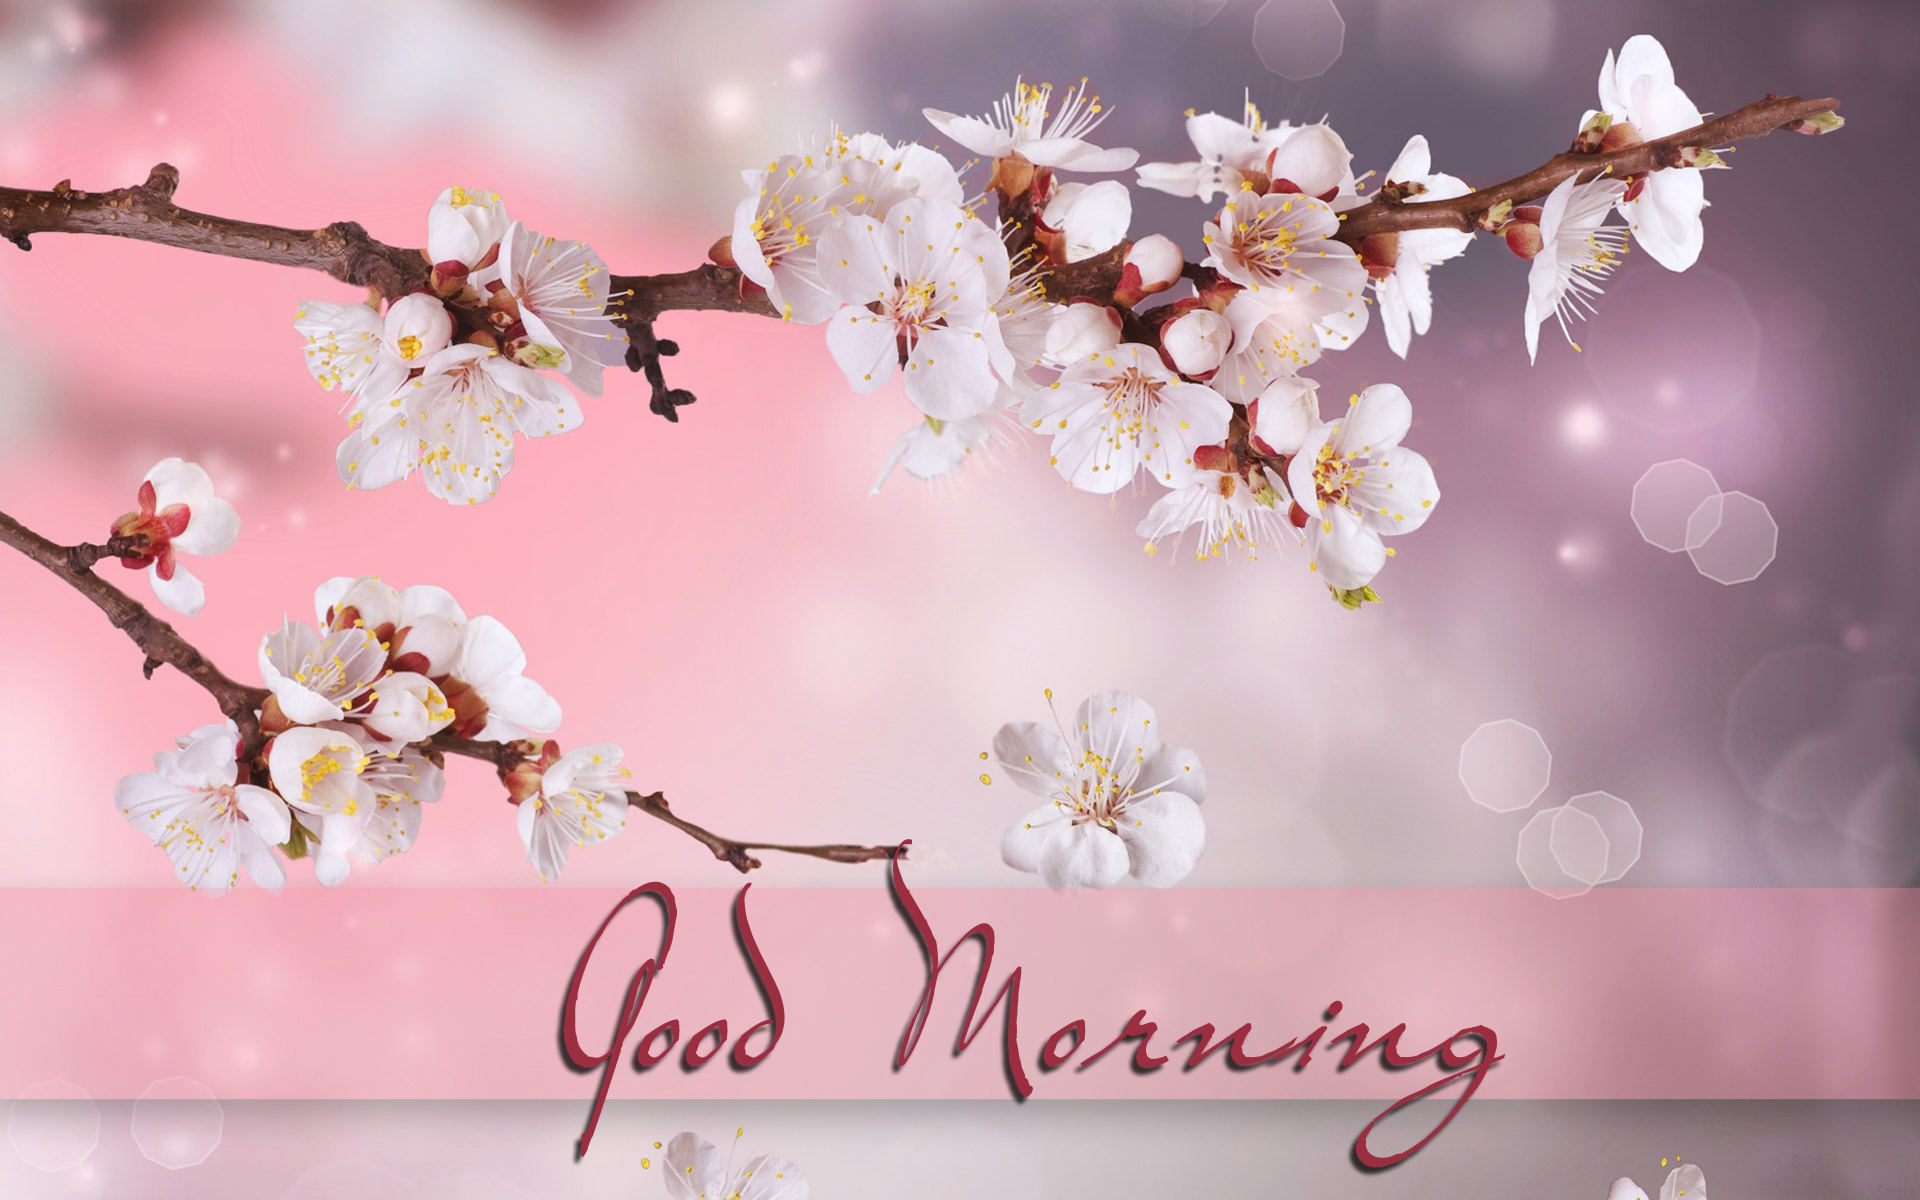 Good Morning HD Image With Flowers Flower